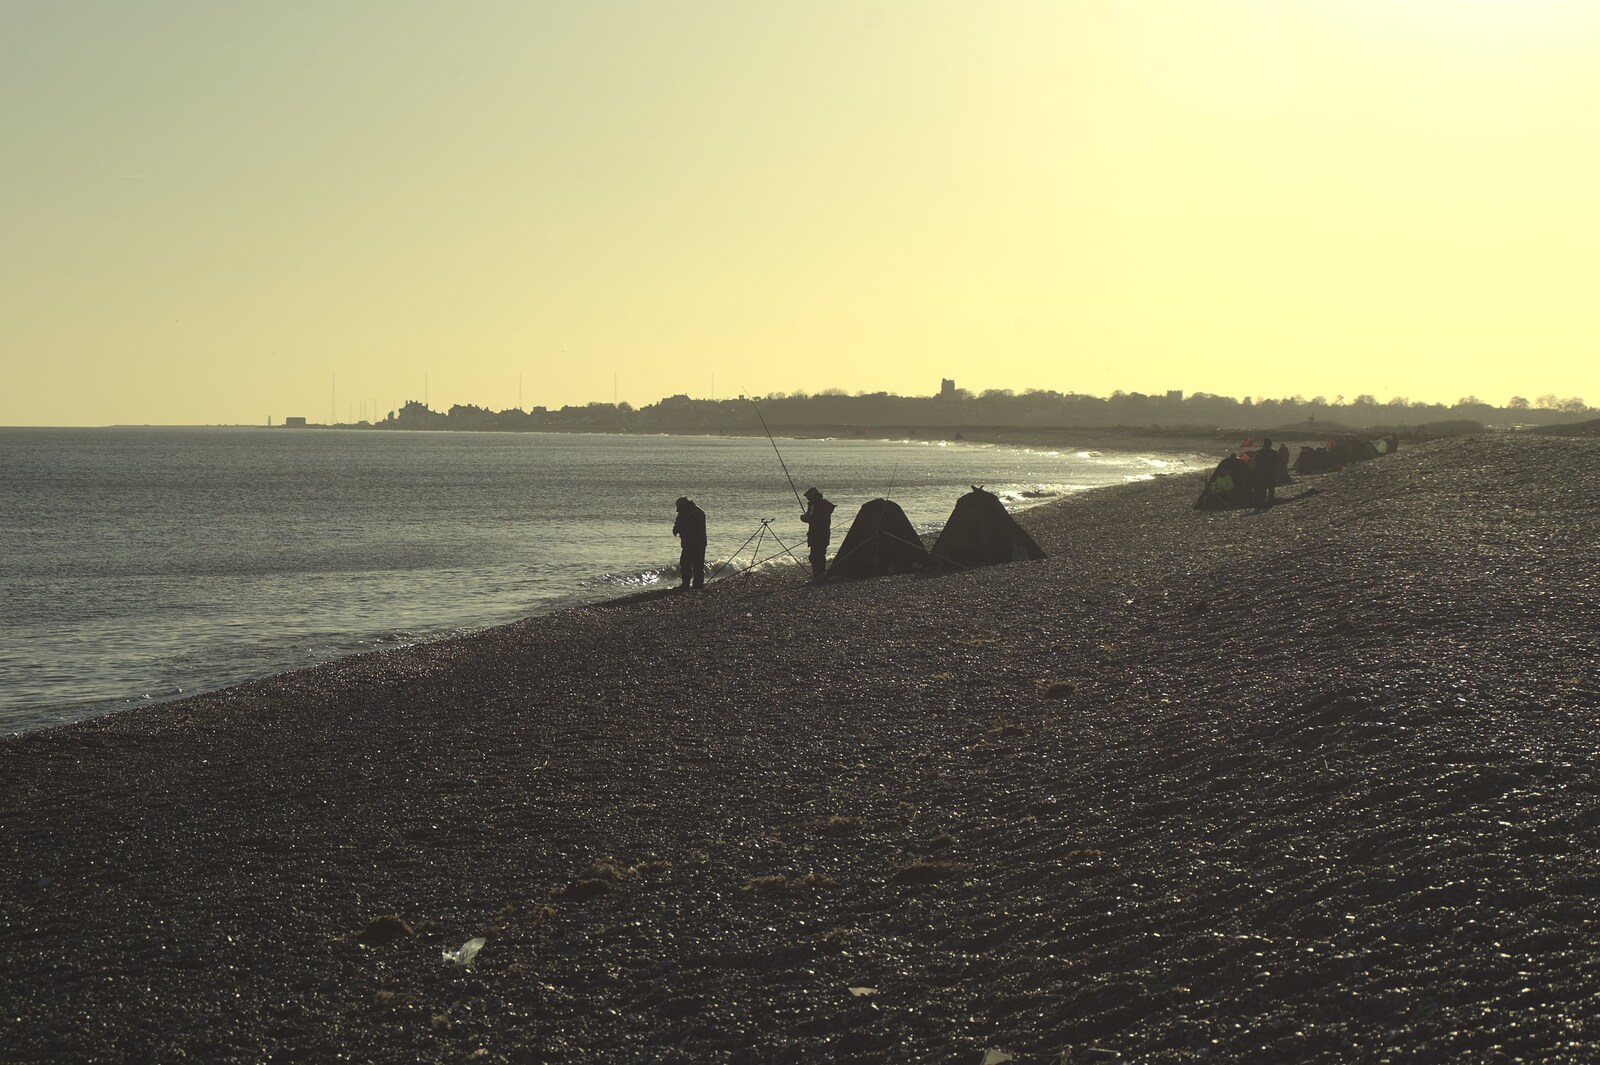 A Trip to Thorpeness, Suffolk - 9th January 2011: Fishermen on the beach